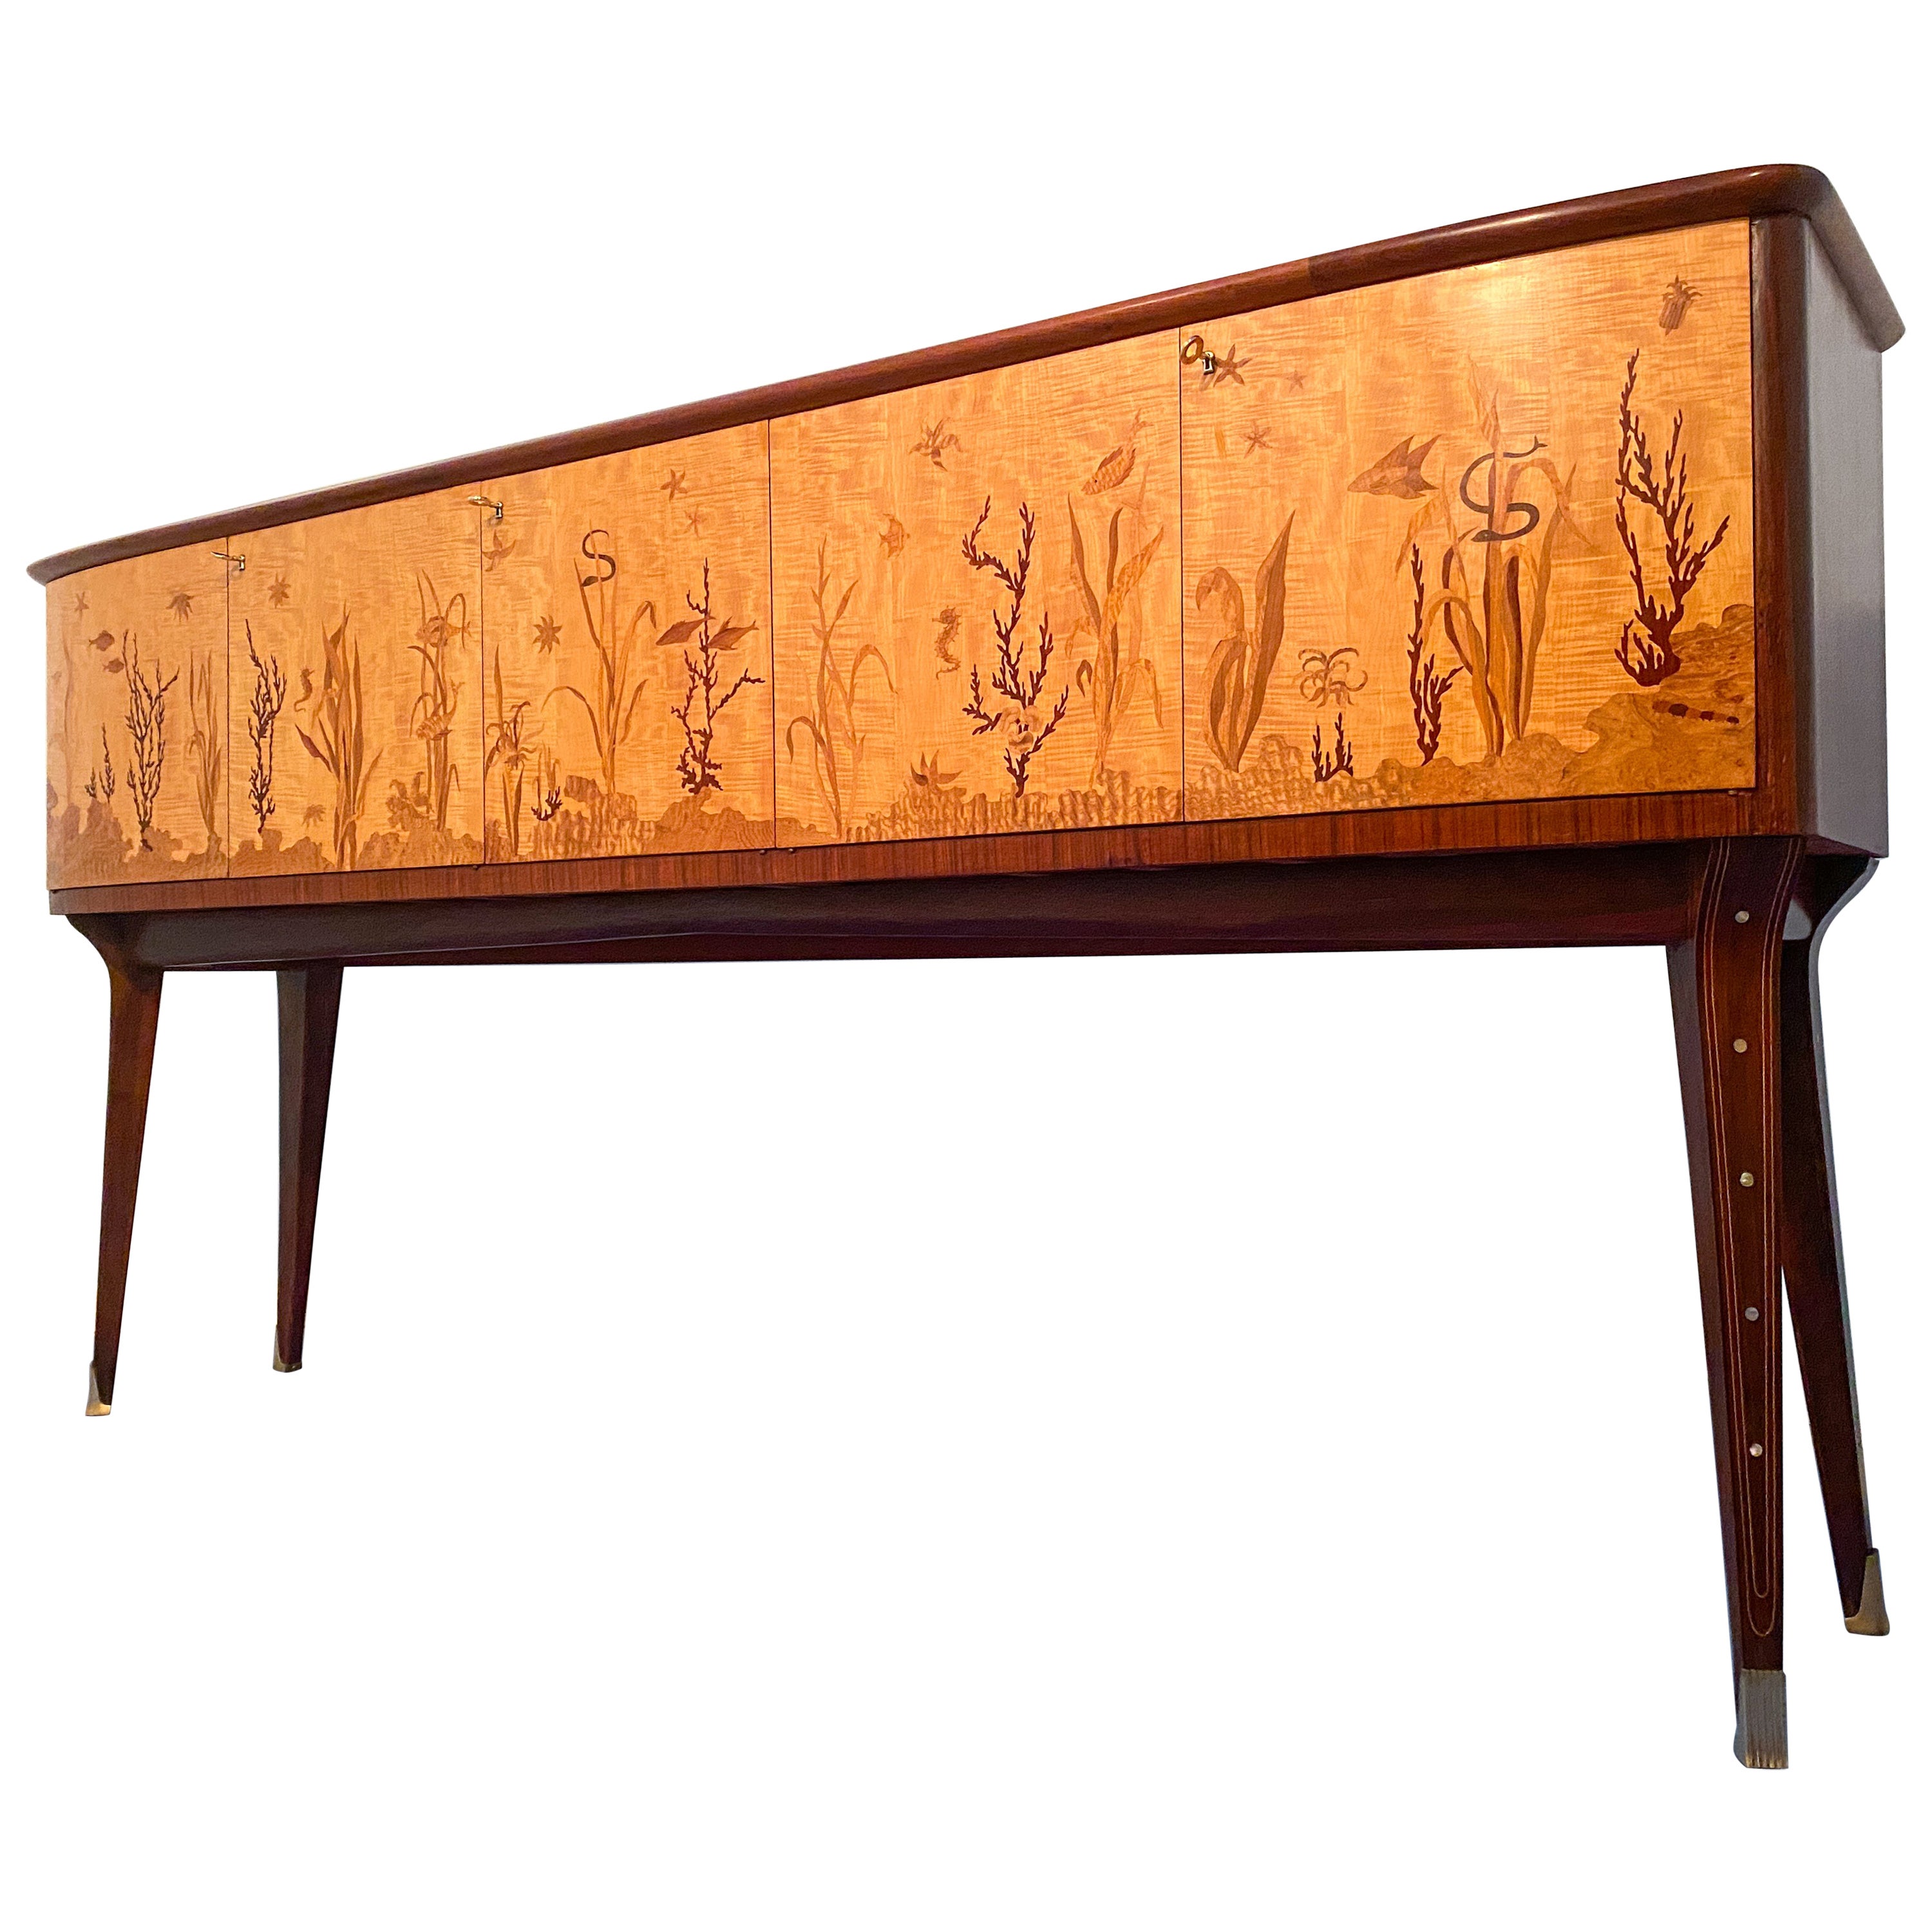 This Italian sideboard from the 1950s is truly exquisite, with its intricate hand-inlaid design by the renowned artist, inlayer, and marquetry master, Andrea Gusmai (Trani 1 May 1902-30 March 1992). The sideboard boasts an elegant and refined